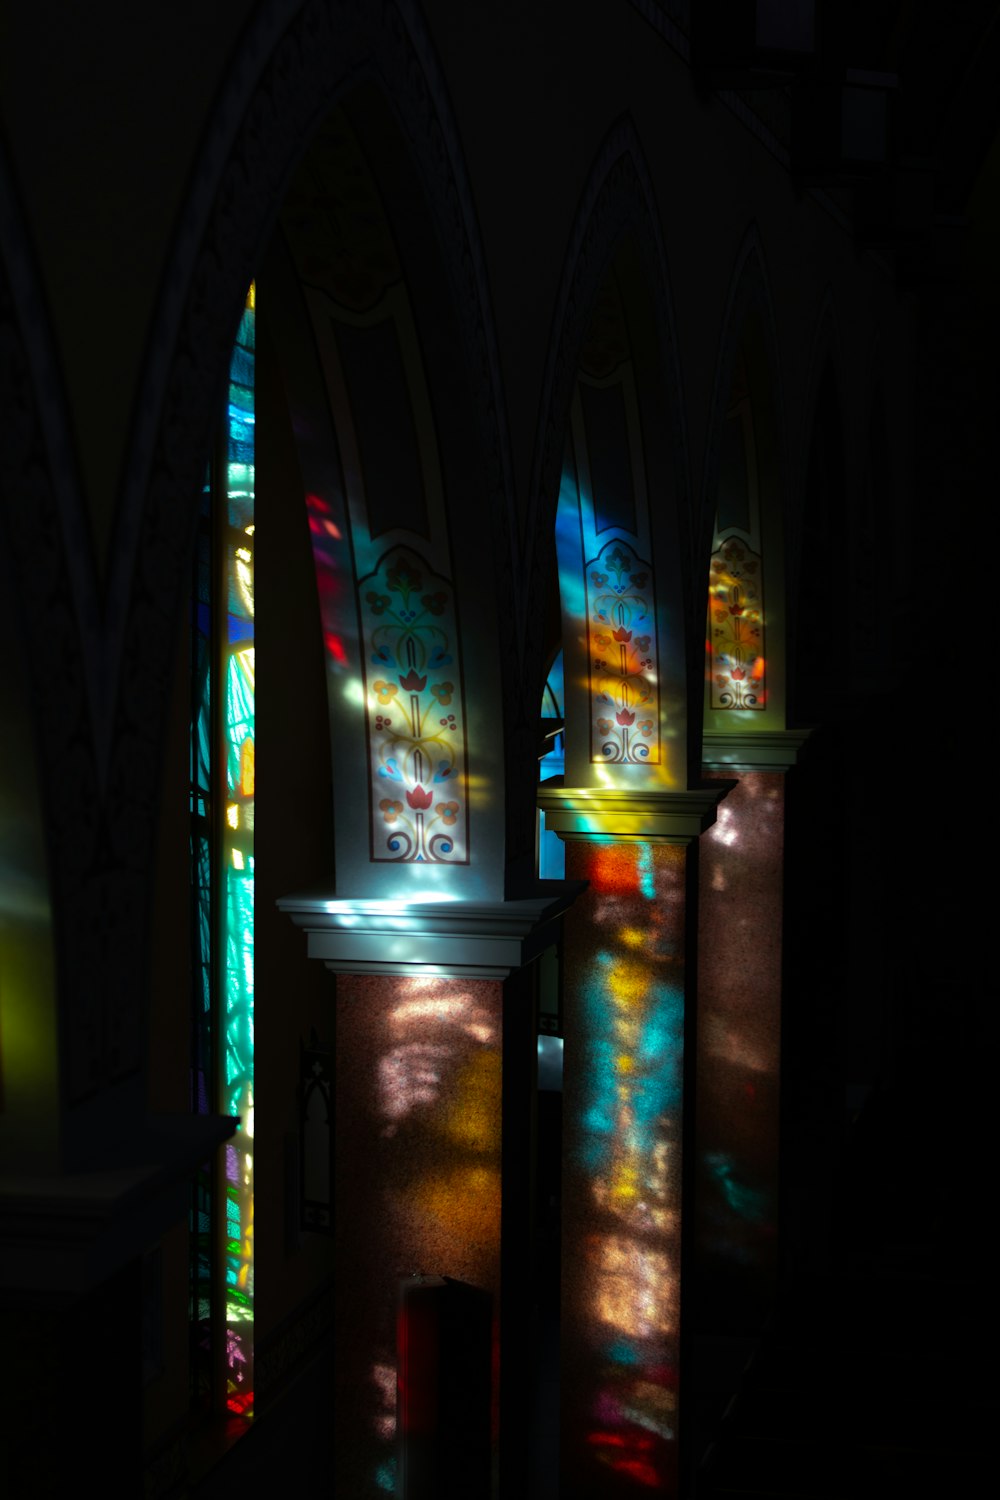 a church with stained glass windows in it